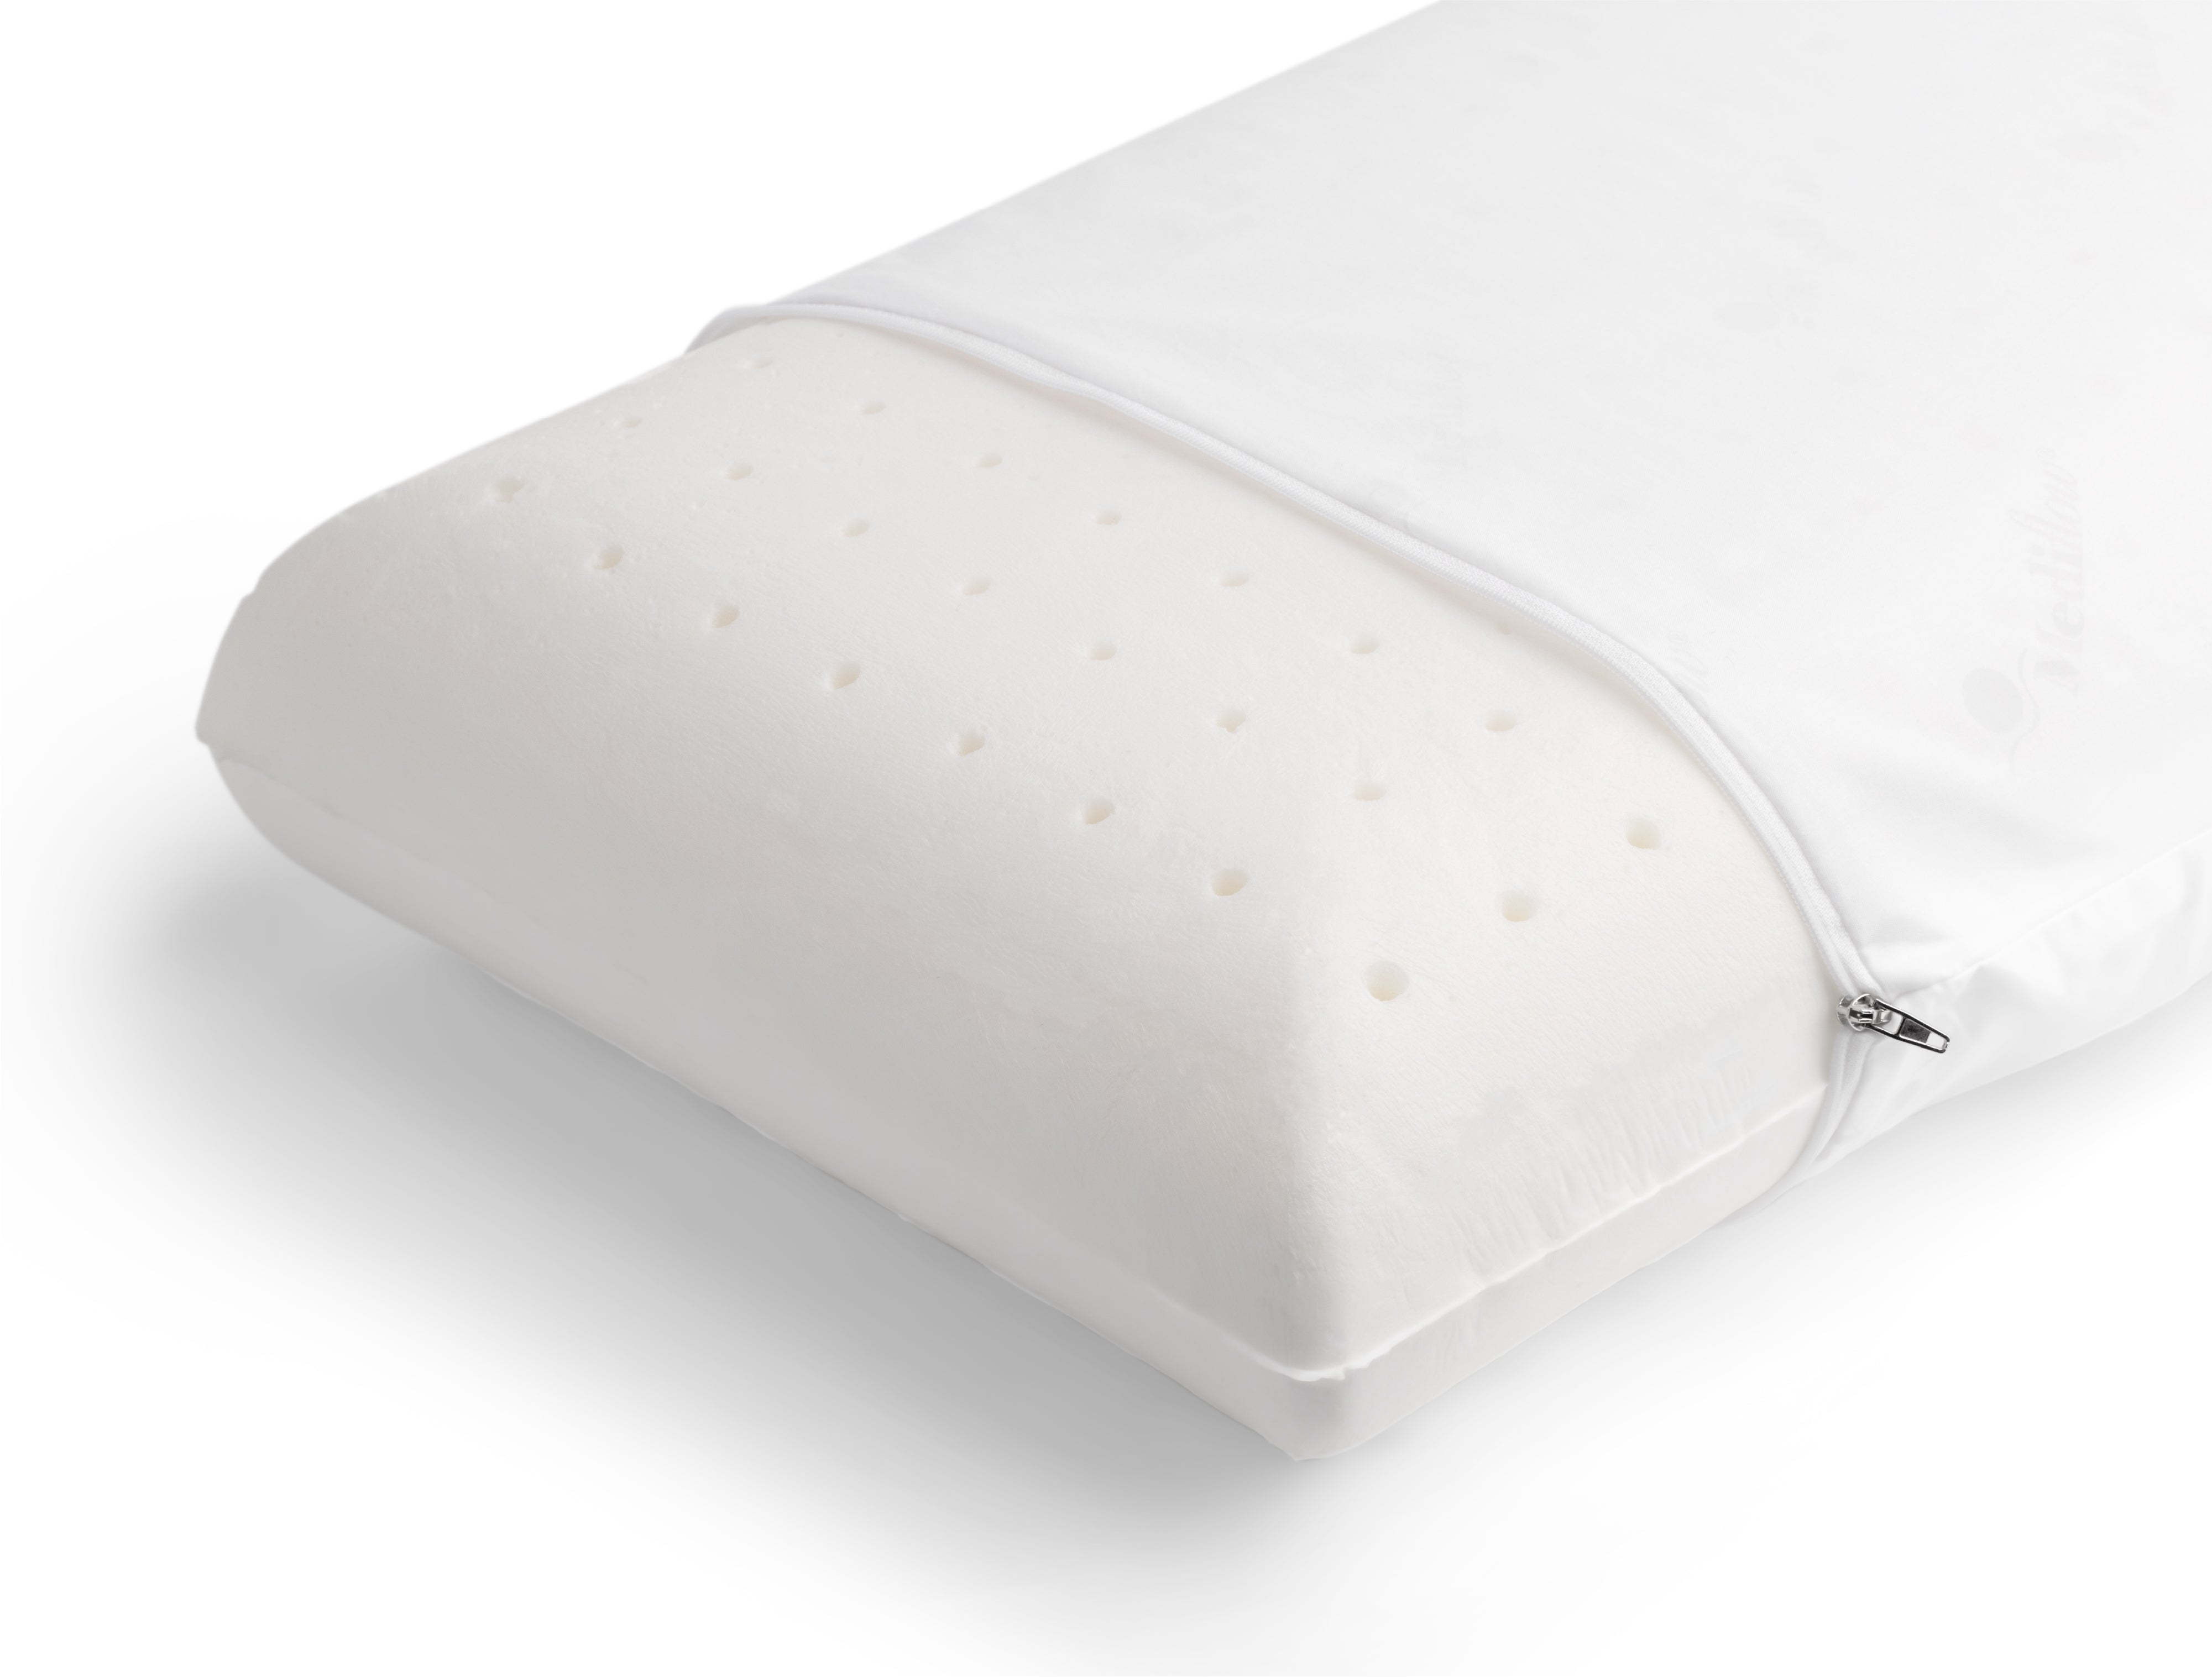 Original Memory Foam Pillow - Therapeutic | The Water Pillow by